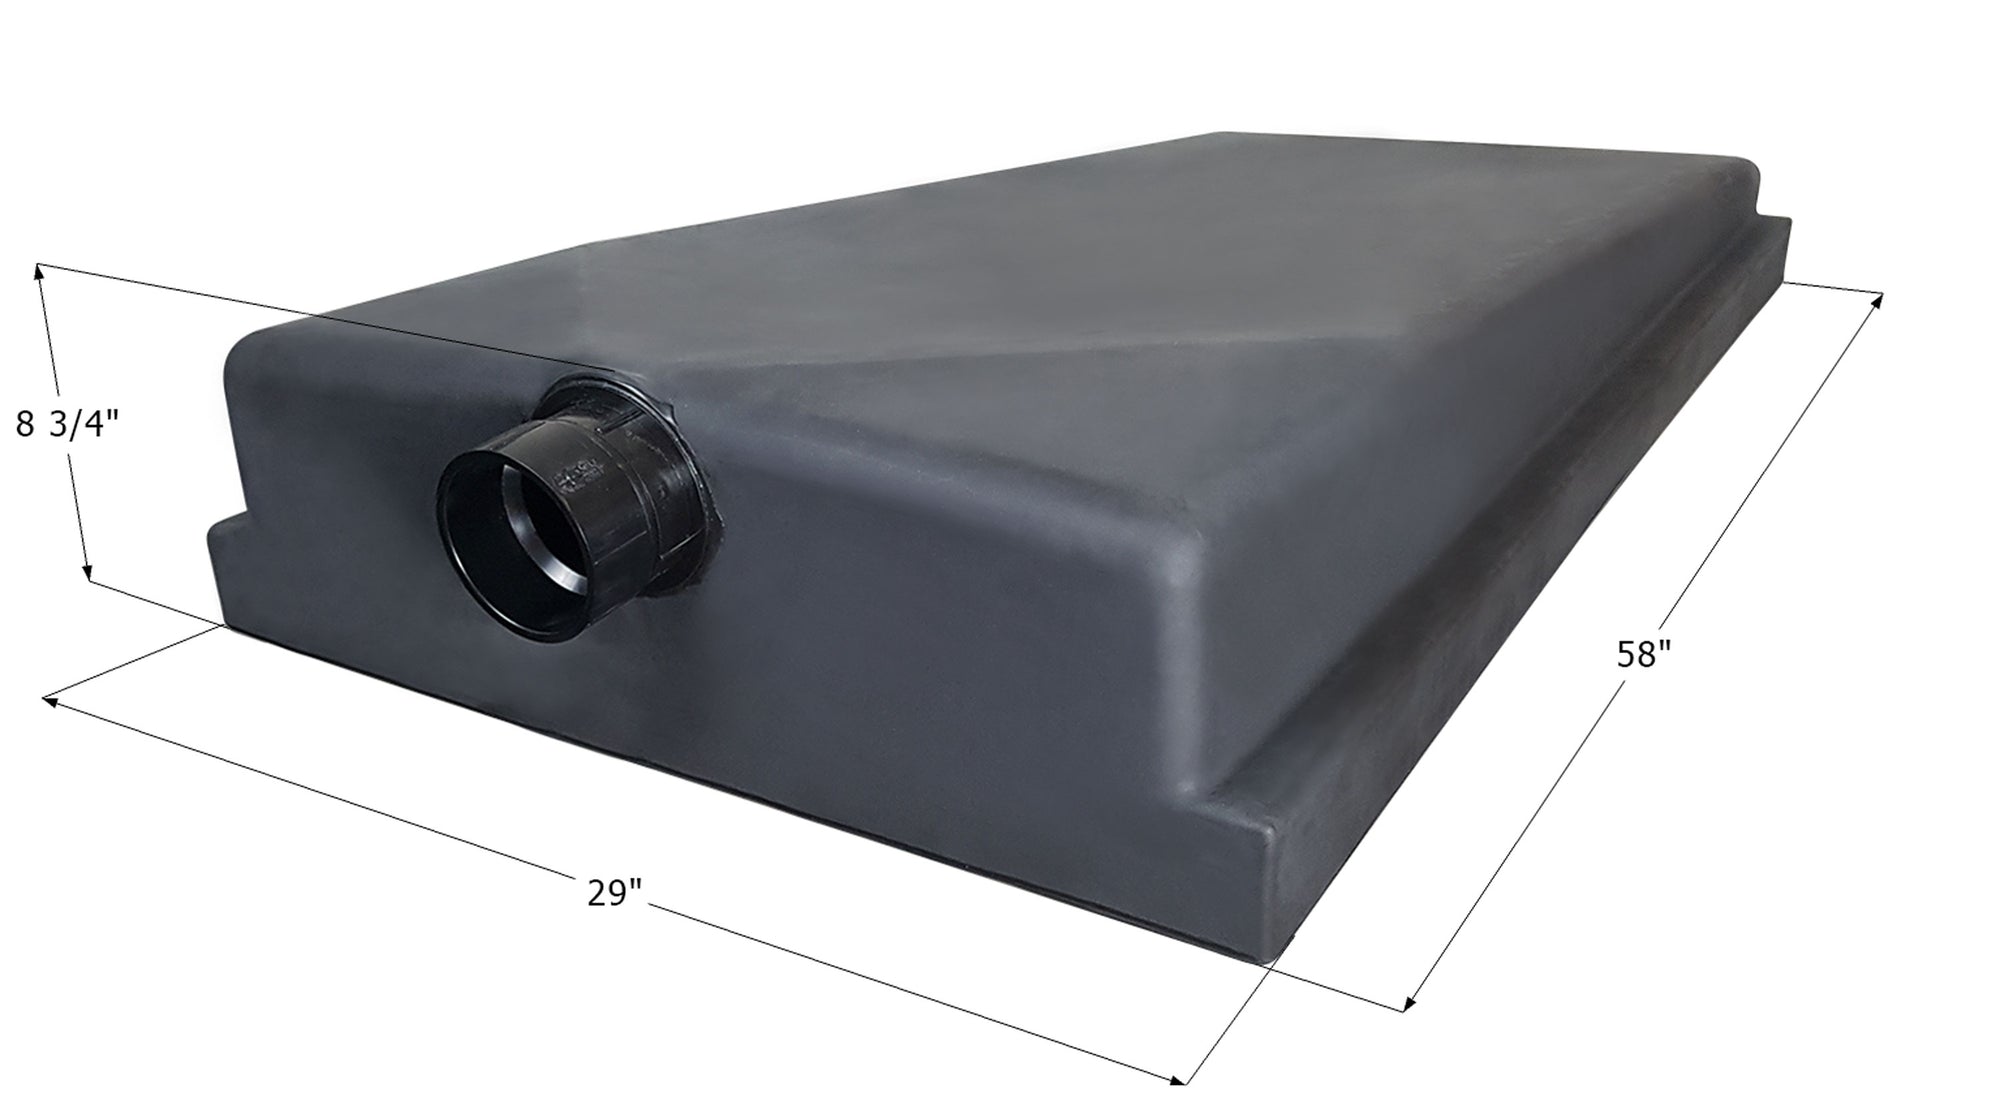 Icon 14321 Holding Tank H3678 for Jayco 5th Wheel Travel Trailer - 58" x 29" x 8.75", 45 Gallon